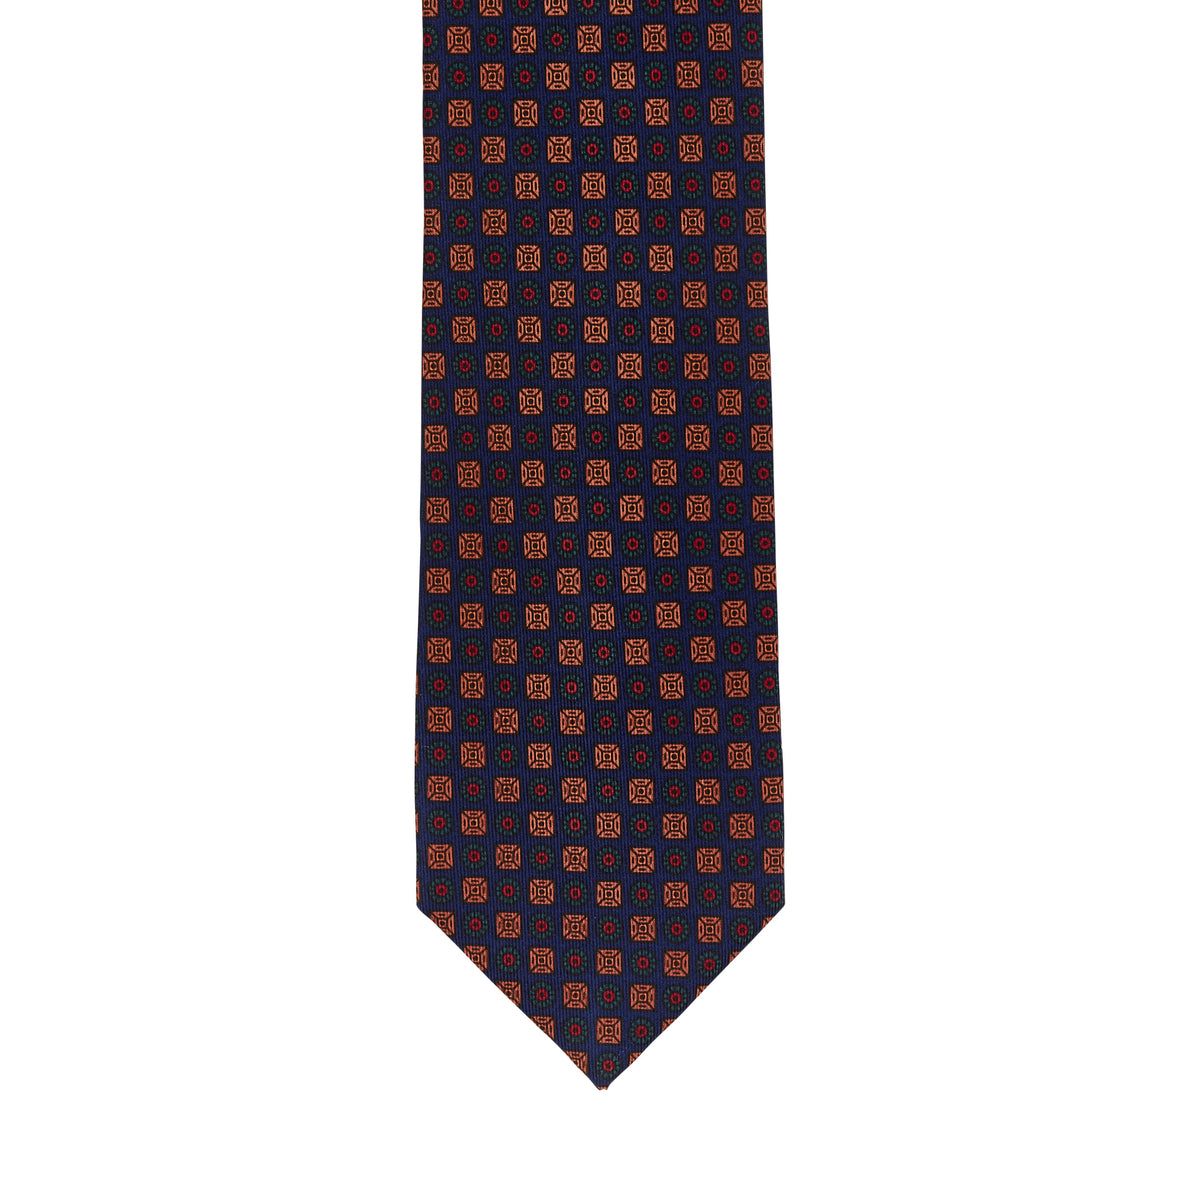 A Sovereign Grade Dark Navy Ancient Madder Tie with polka dots on a white background, made to the highest quality standards in the United Kingdom by KirbyAllison.com.